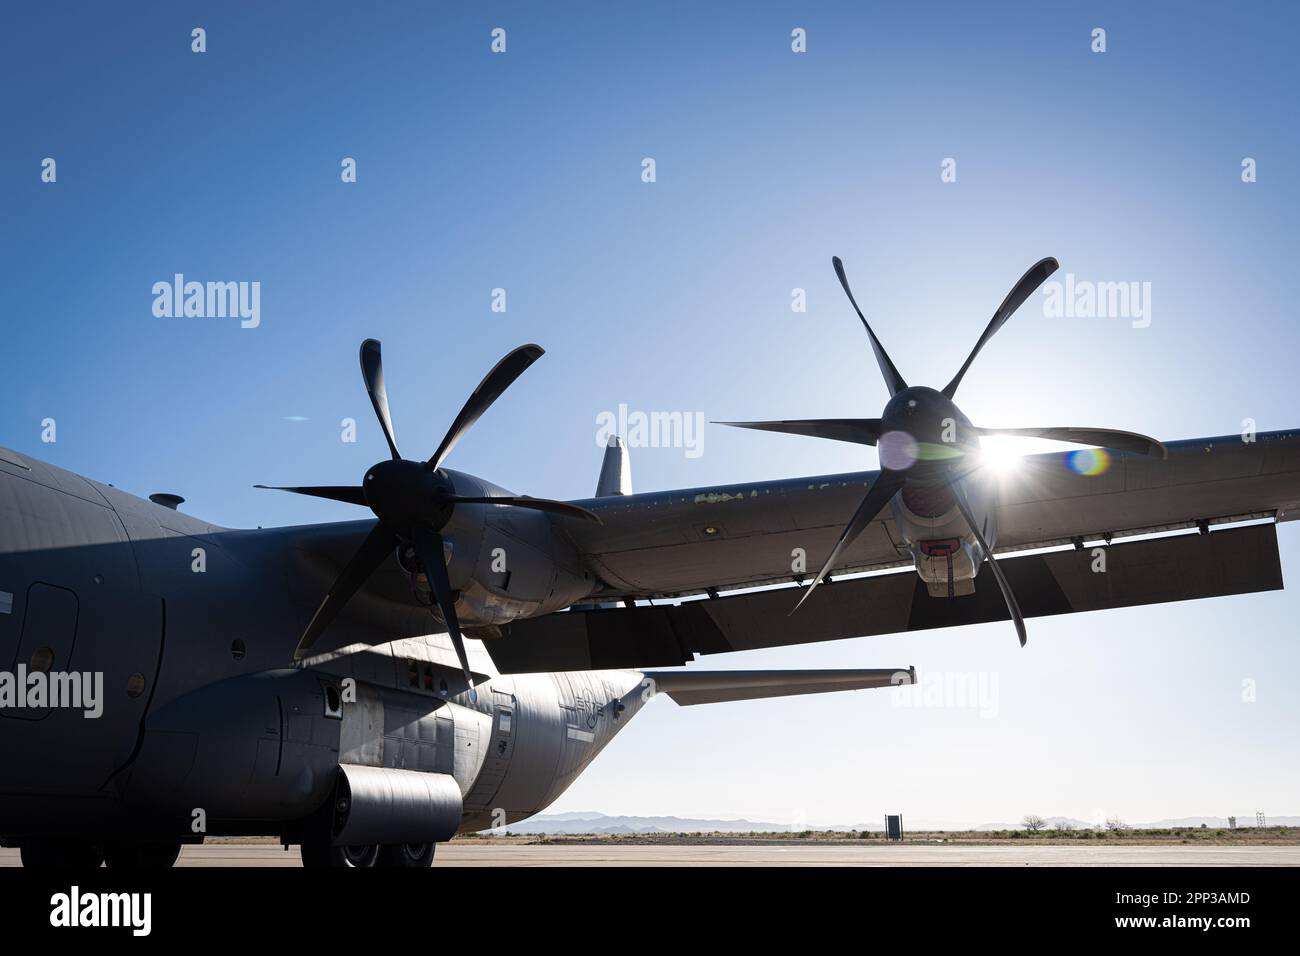 A U.S. Air Force C-130J Hercules aircraft assigned to the 61st Airlift Squadron, sits on the flight line of the Advanced Airlift Tactics Training Center, while attending the Advanced Tactics Airlift Course at Fort Huachuca, Arizona, April 18, 2023. The mission of the AATTC is increasing the warfighting effectiveness and survivability of mobility forces. Since 1983 the AATTC has provided advanced tactical training to mobility aircrews from the Air National Guard, Air Force Reserve Command, Air Mobility Command, Air Combat Command, Air Force Special Operations Command, United States Marine Corps Stock Photo